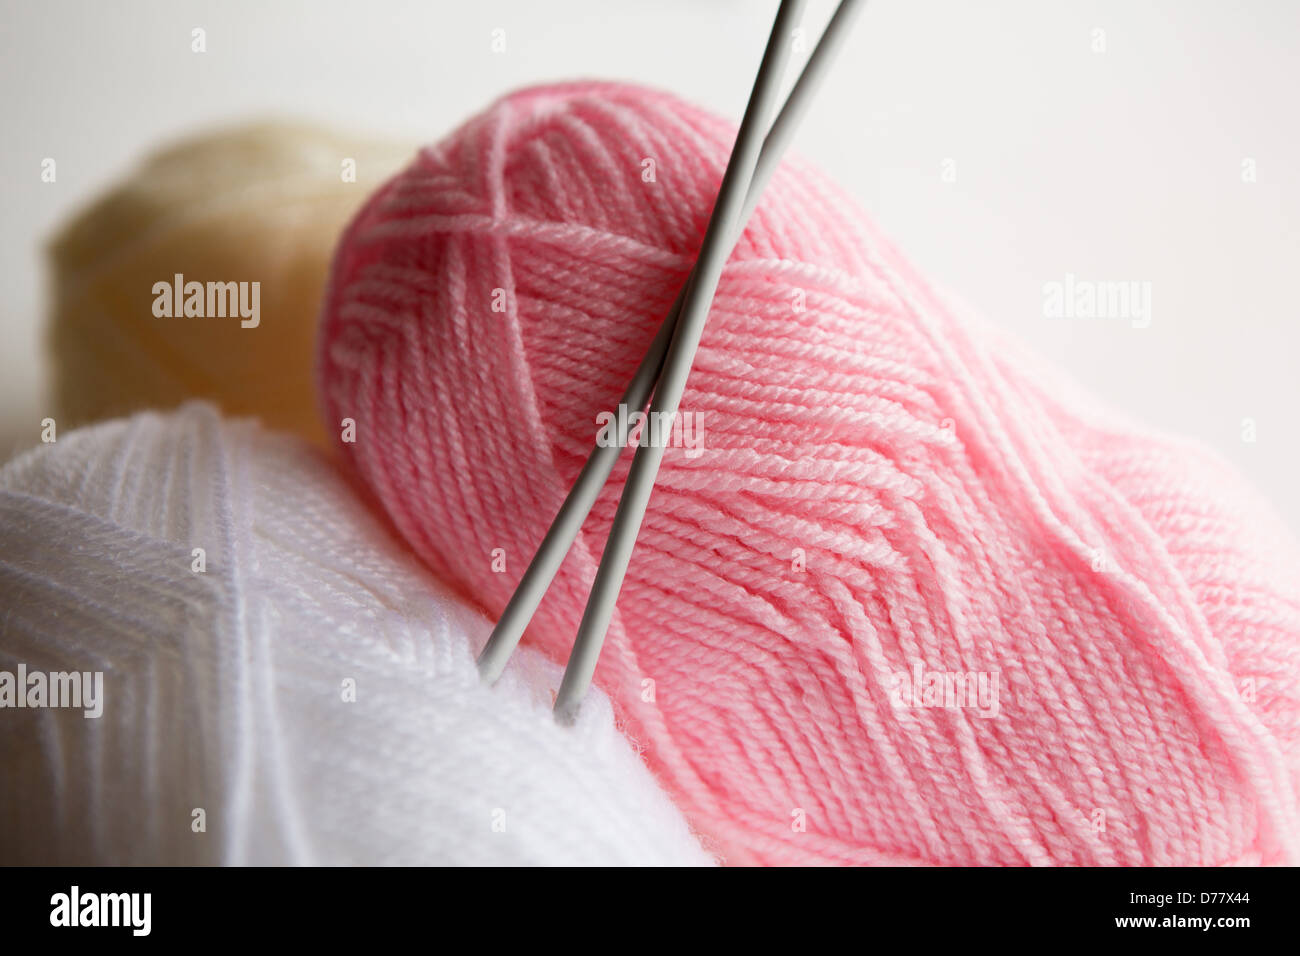 Three balls of wool with a set of knitting needles placed in one ball Stock Photo